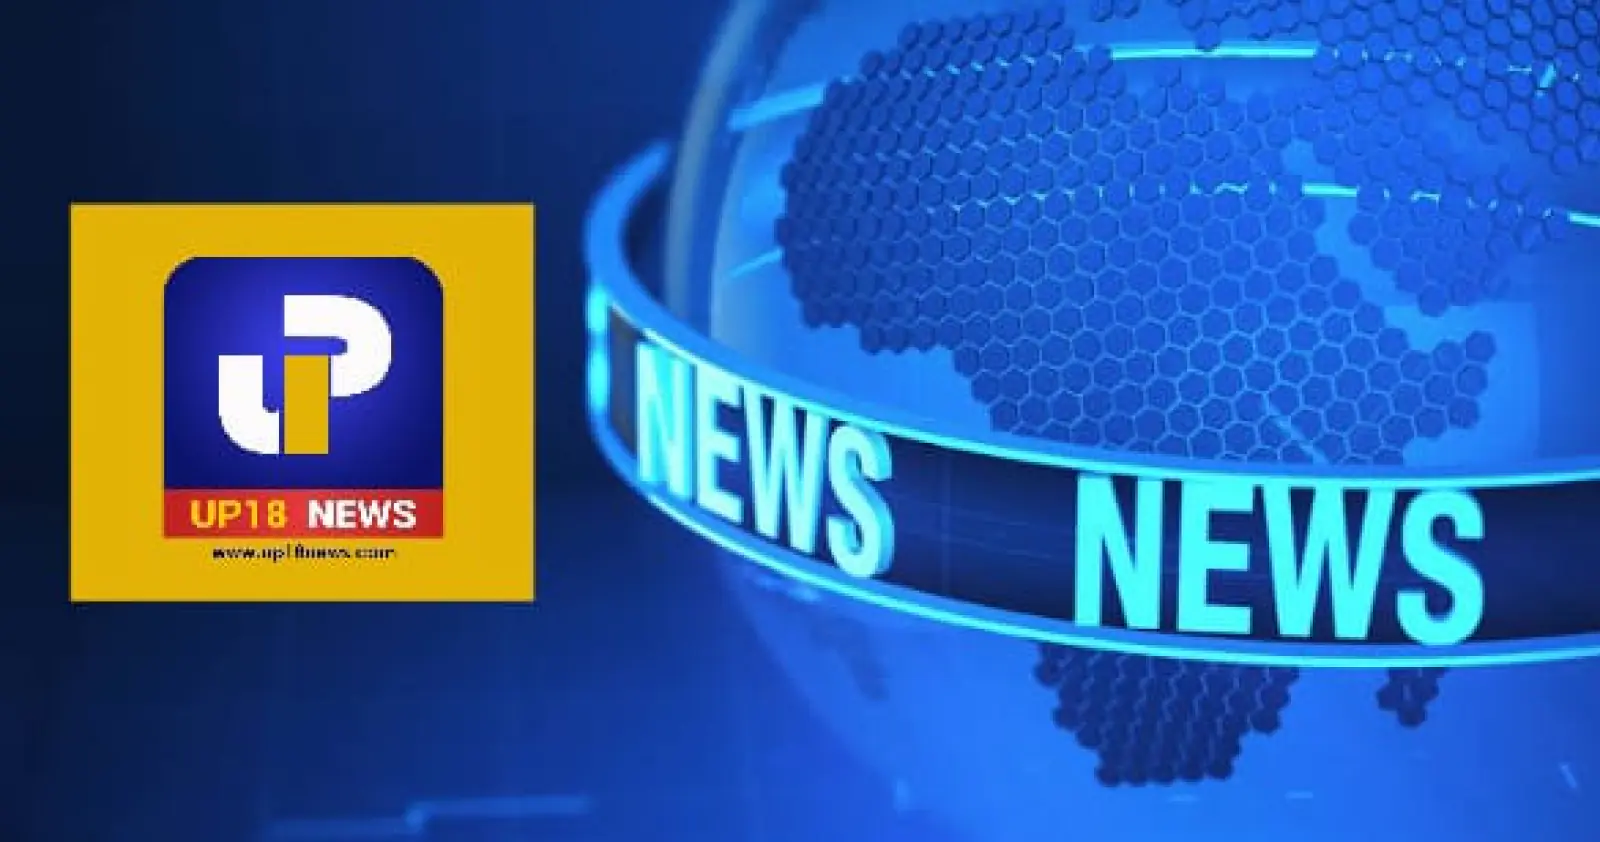 Up18 News Revolutionizes Journalism, Paving the Way for Accurate and Innovative Reporting